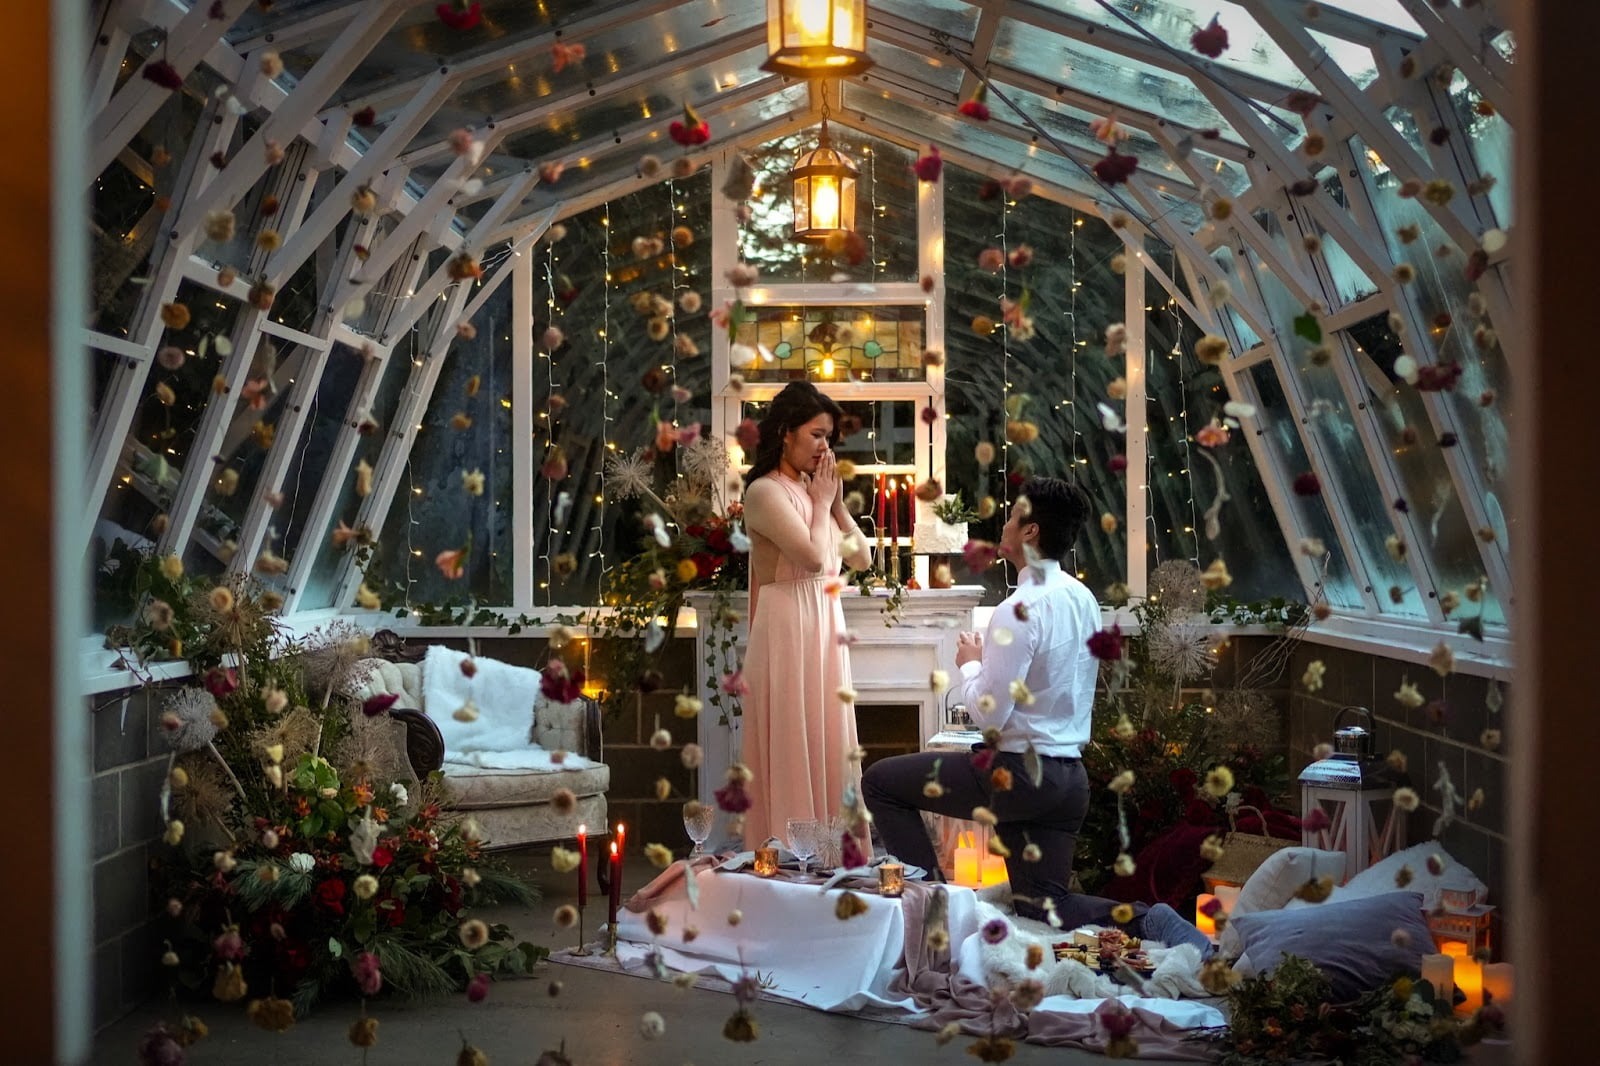 Man proposes to woman, on bended knee in beautifully decorated greenhouse at night